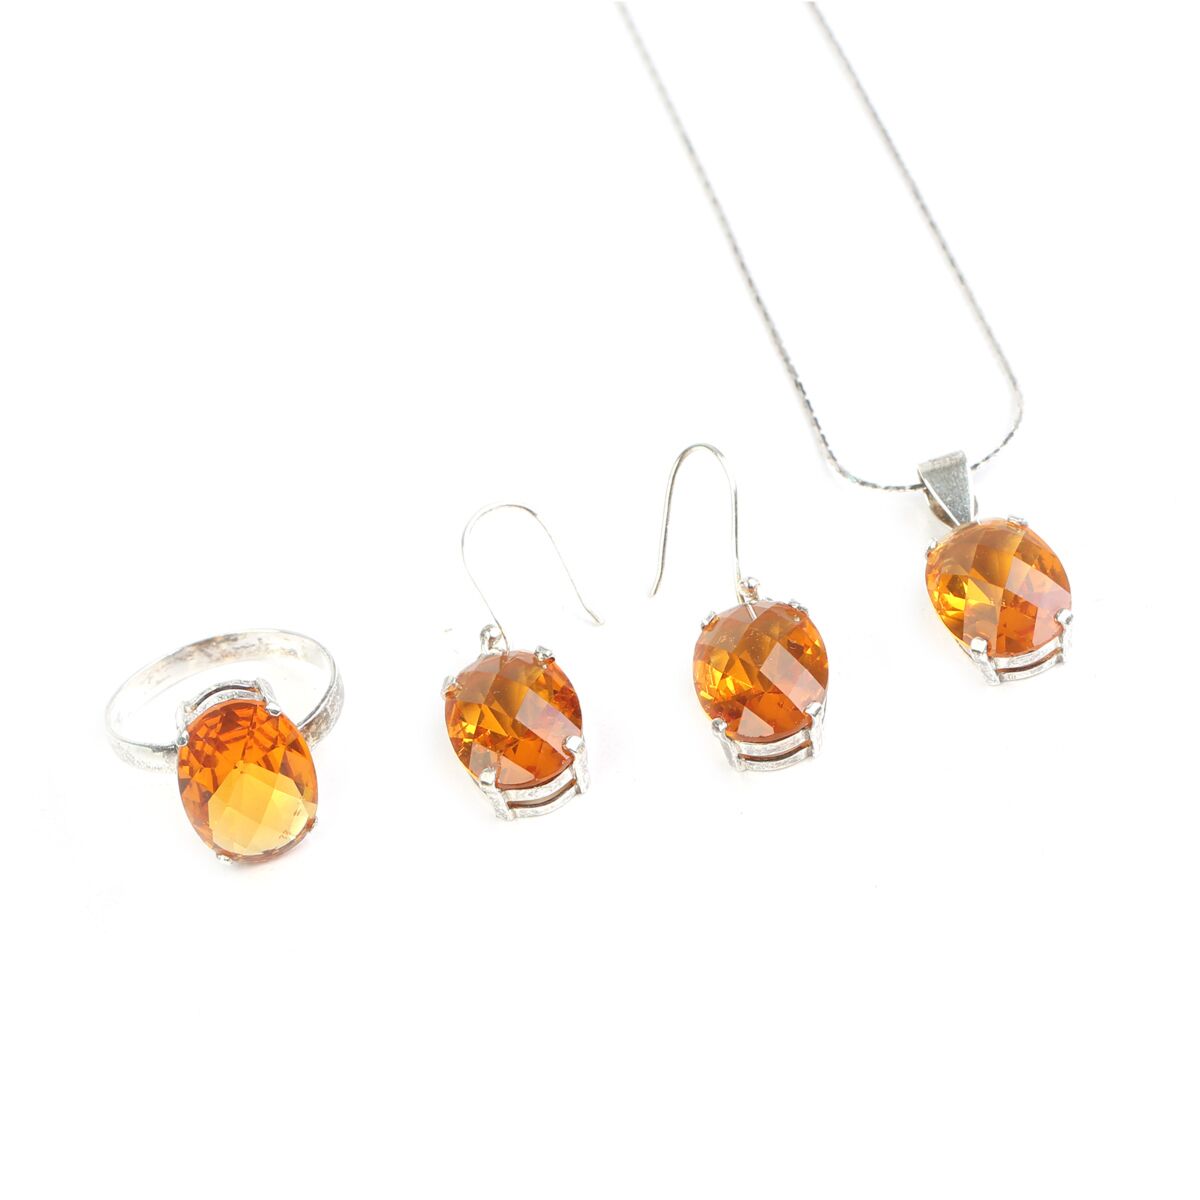 Citrine Jewelry Complete Set | Female Ring, Earrings, and Necklace Set 